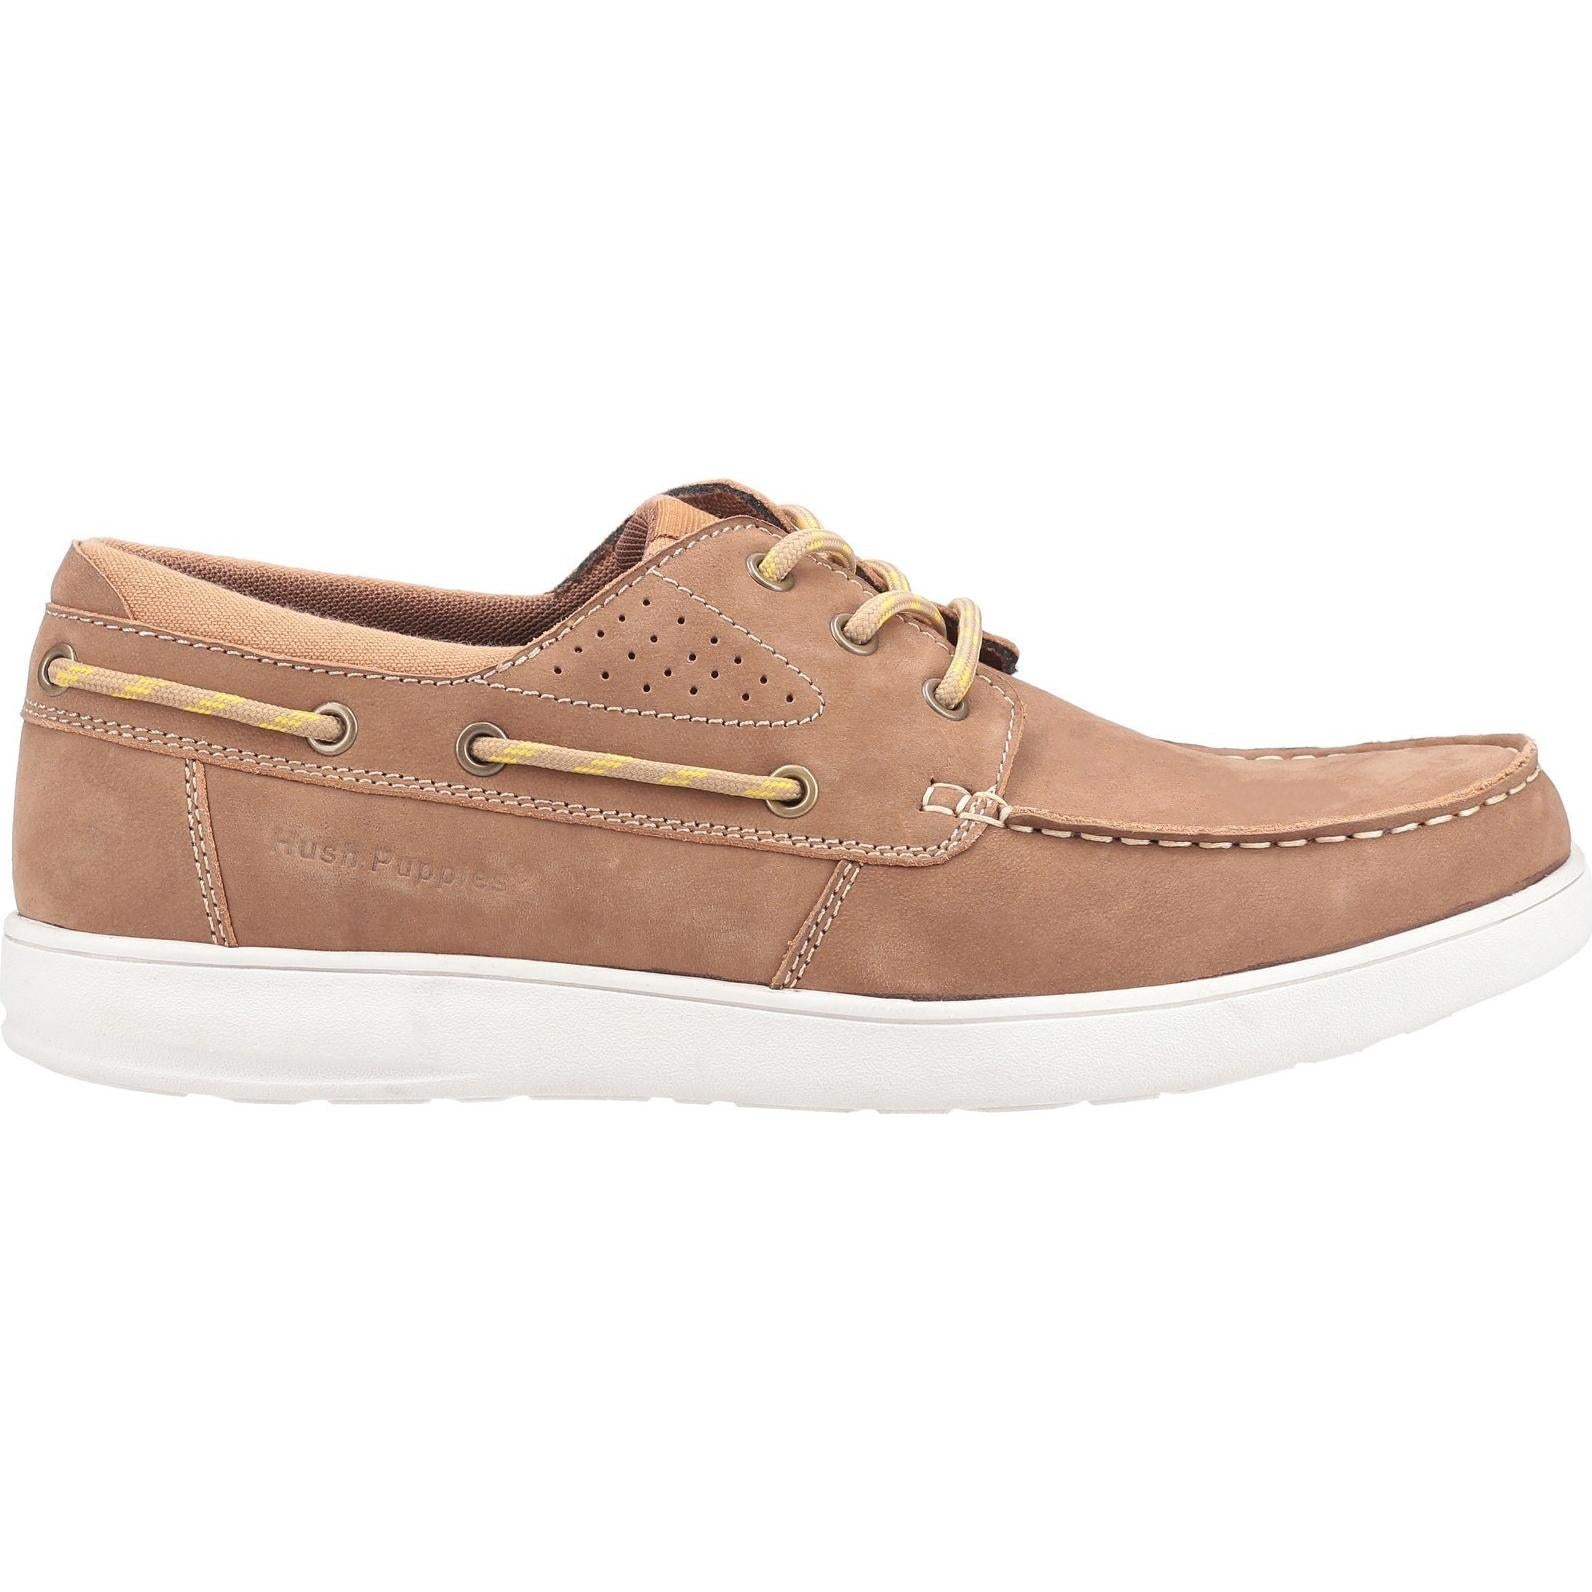 Hush Puppies Liam Lace Up Boat Shoe